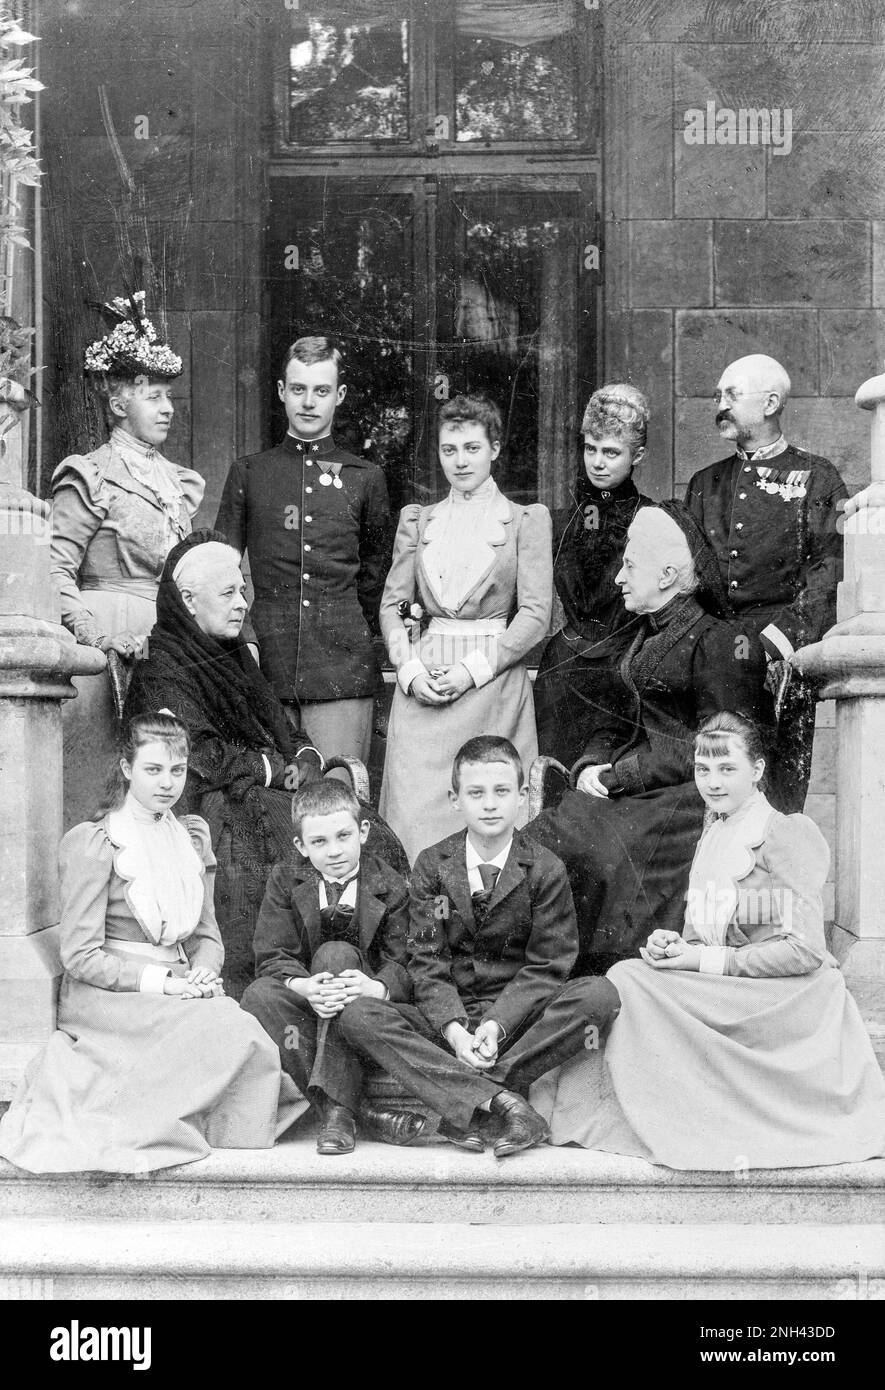 Portrait of a family, men, women, children, soldiers, officer, uniform, Lower Saxony, Germany, about 1915 Stock Photo